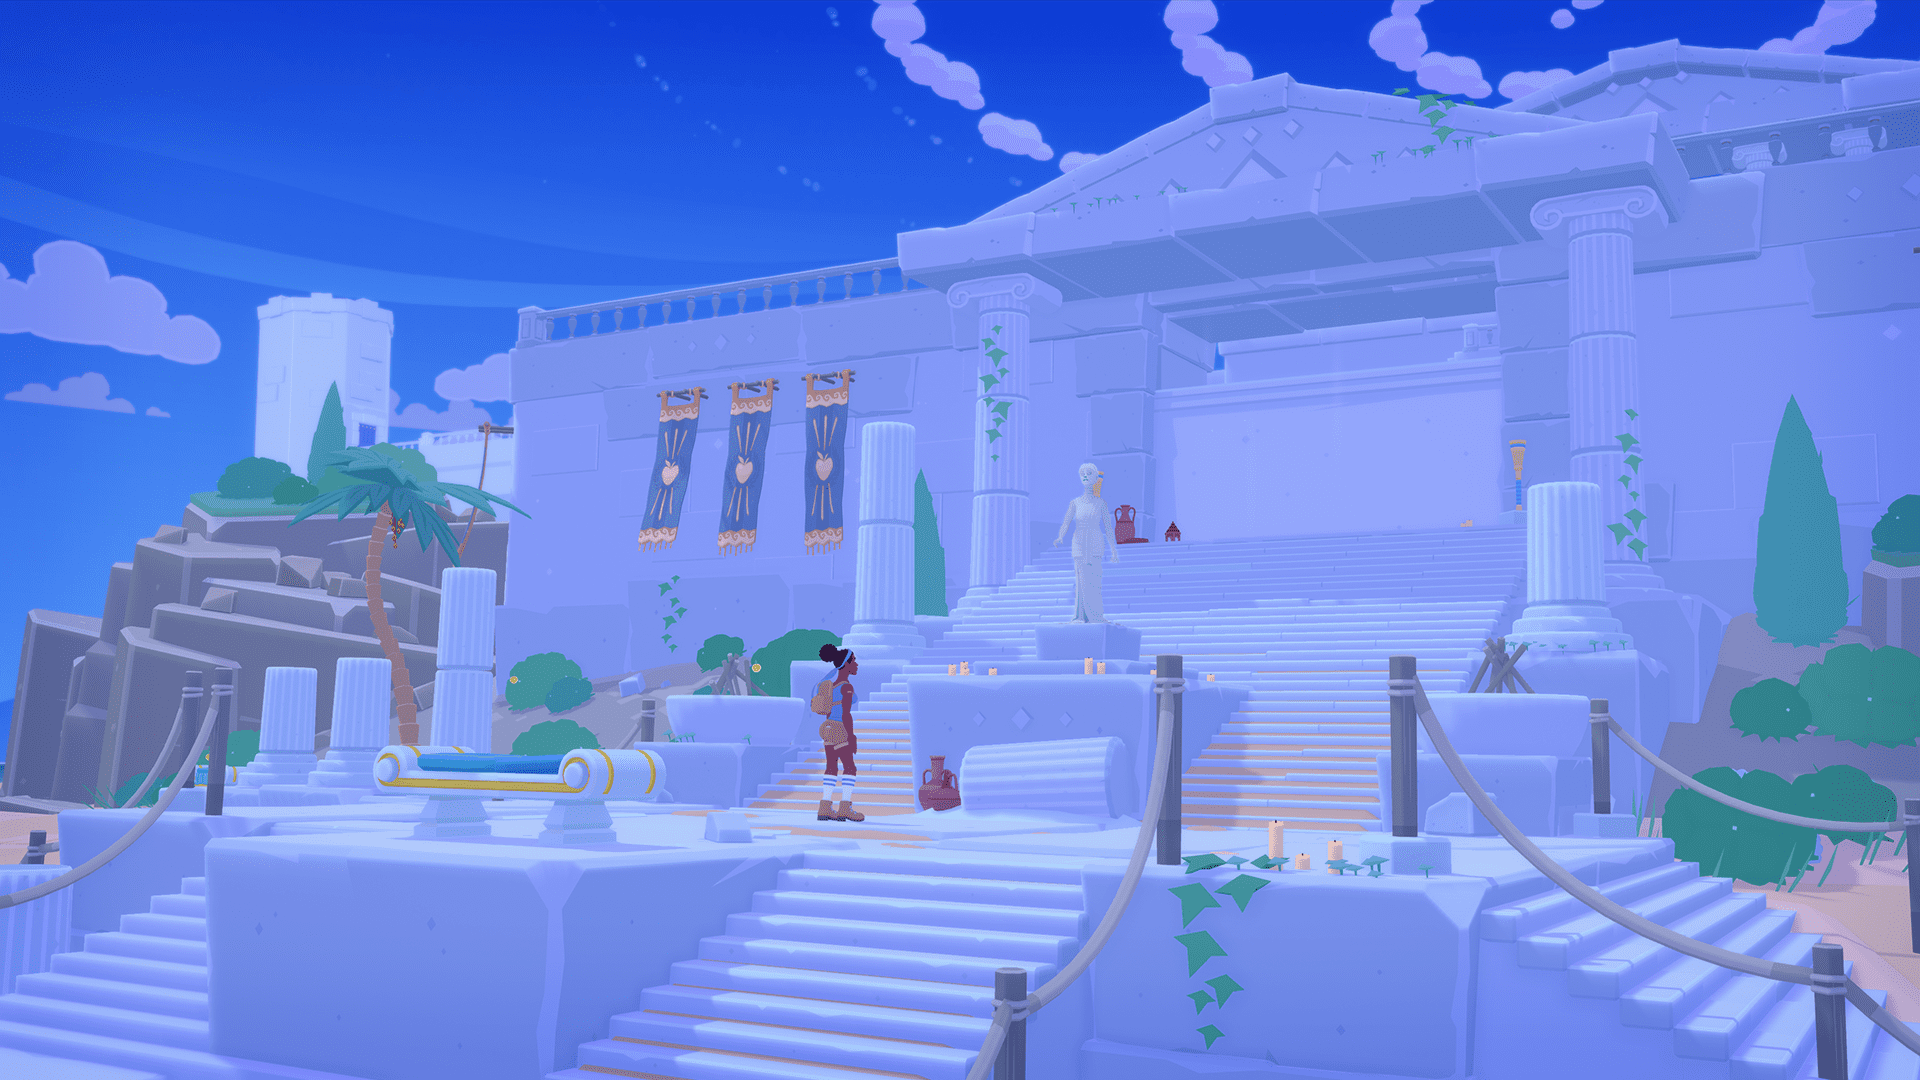 A Black character looking at a statue in front of a locked gate and greek architectural columns and stairs.